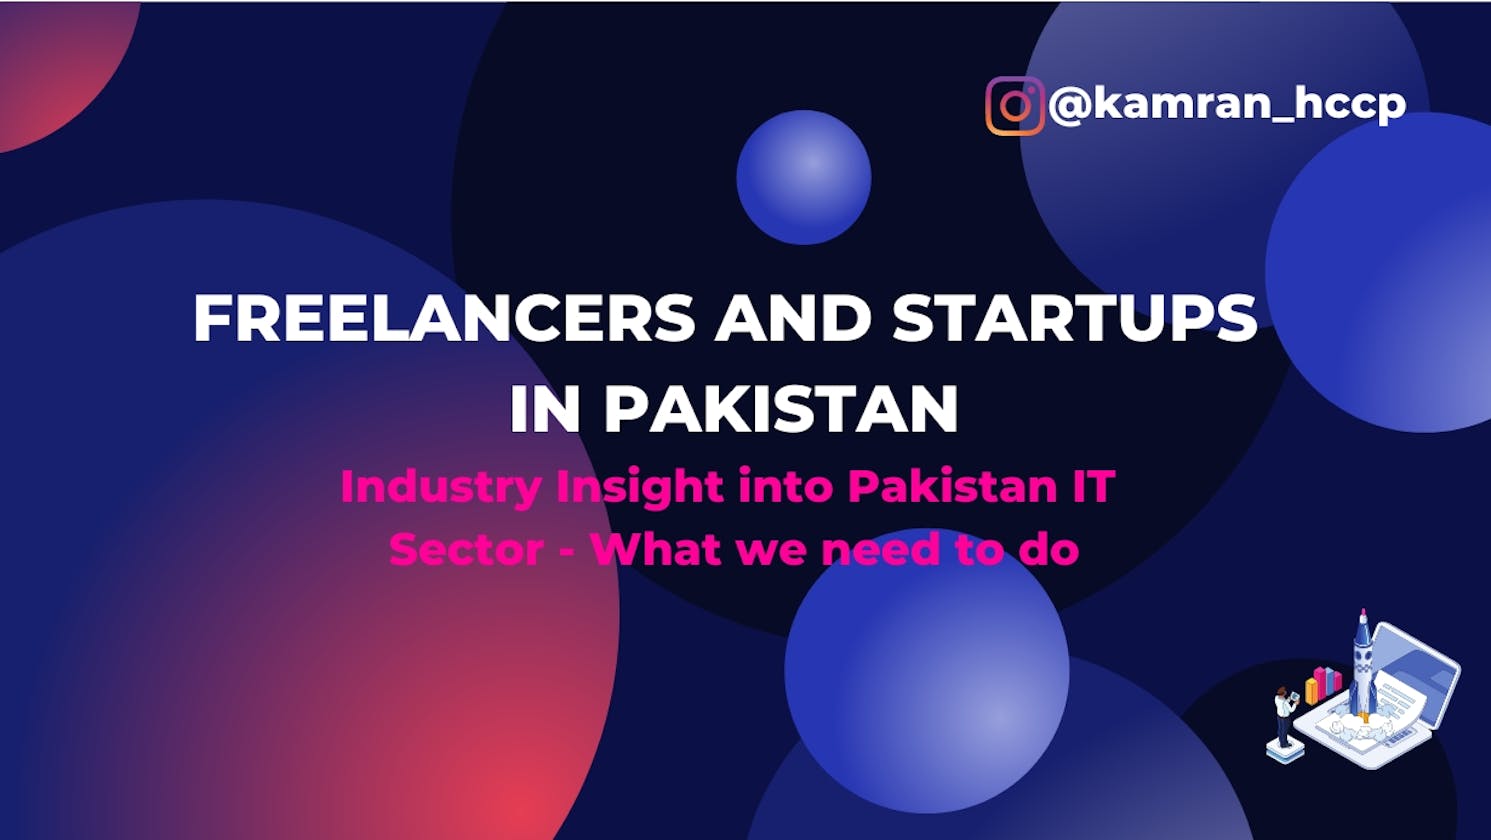 FREELANCERS and STARTUPS in Pakistan 2023 - We need to take a Step Forward